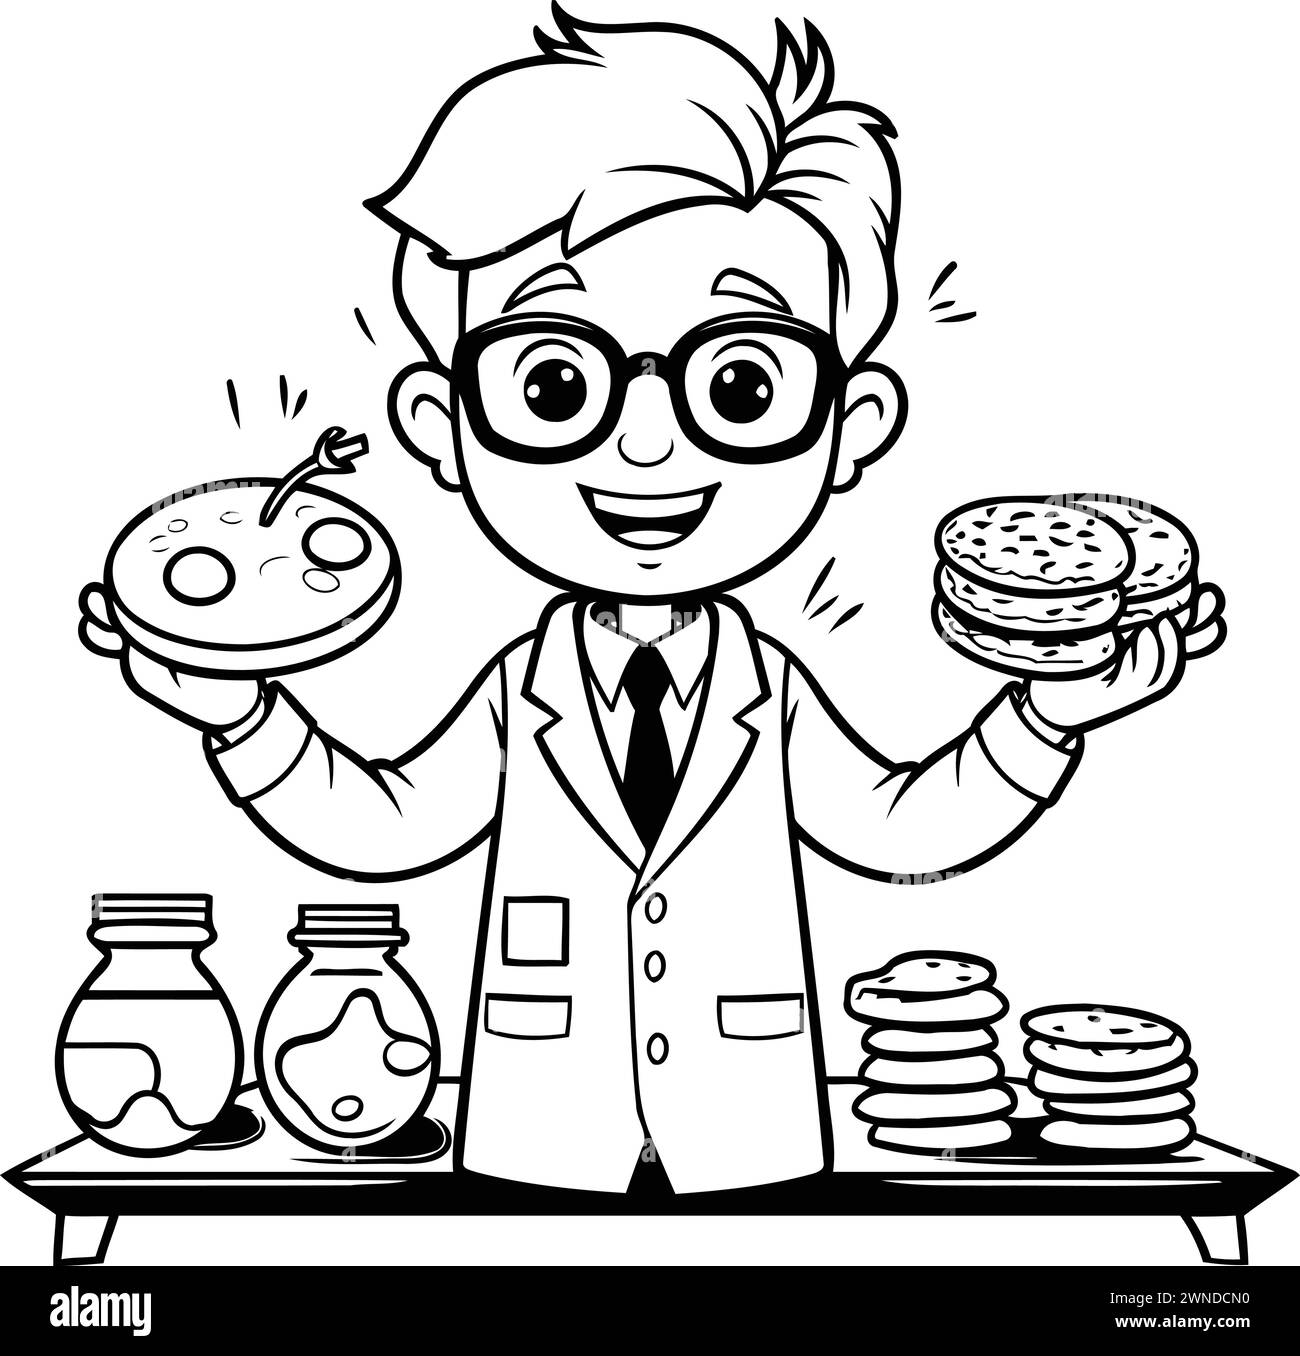 Black and White Cartoon Illustration of Funny Scientist or Professor Holding Donut and Glasses for Coloring Book Stock Vector